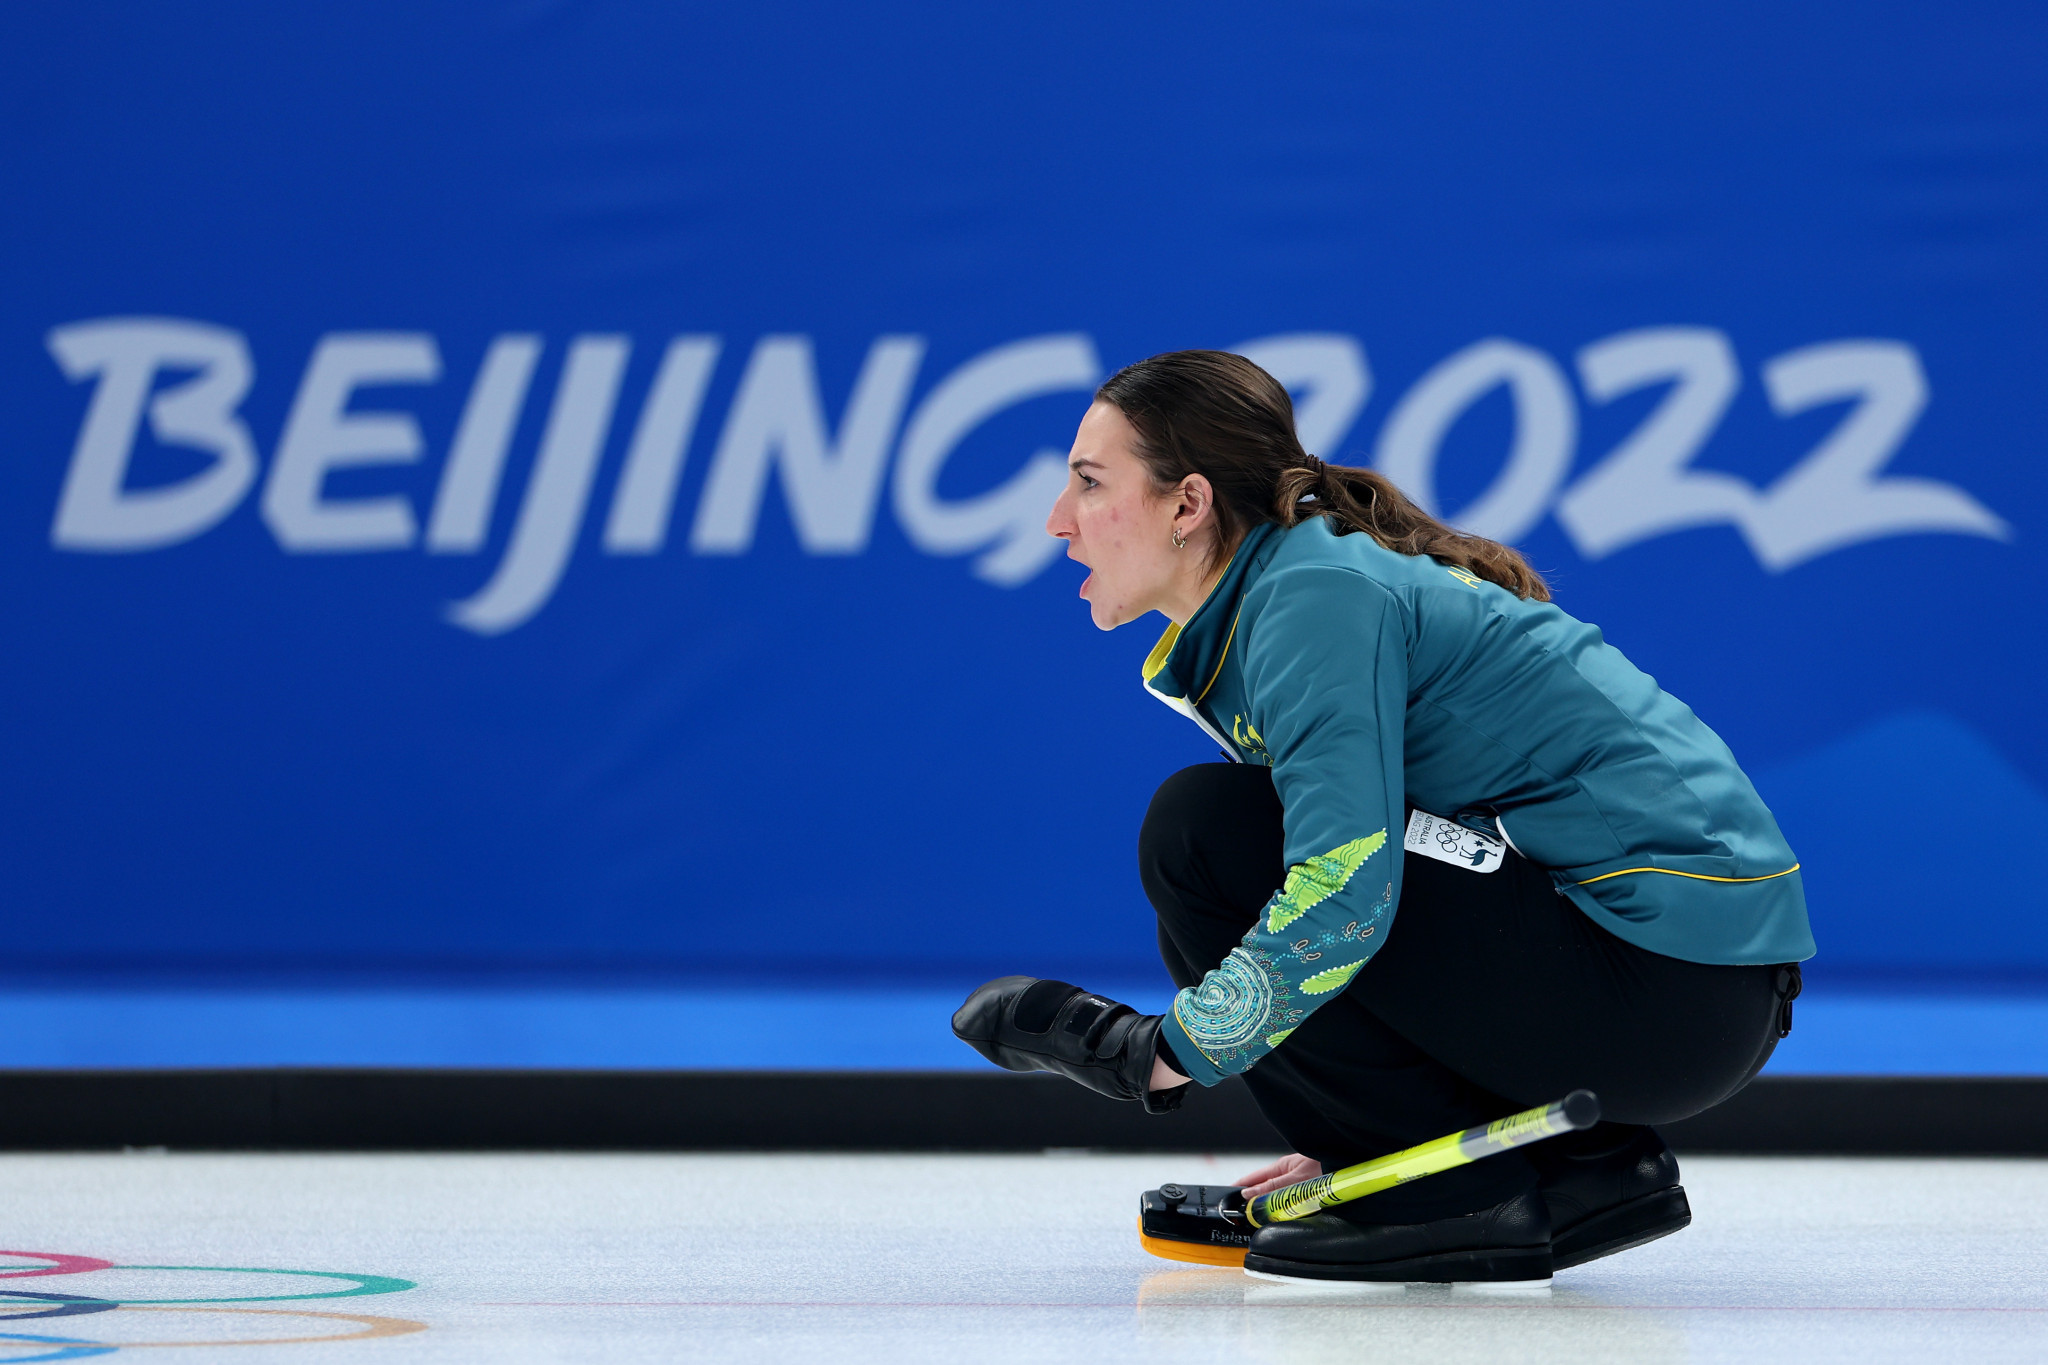 Australia cleared to continue in Beijing 2022 competition after late COVID-19 reversal